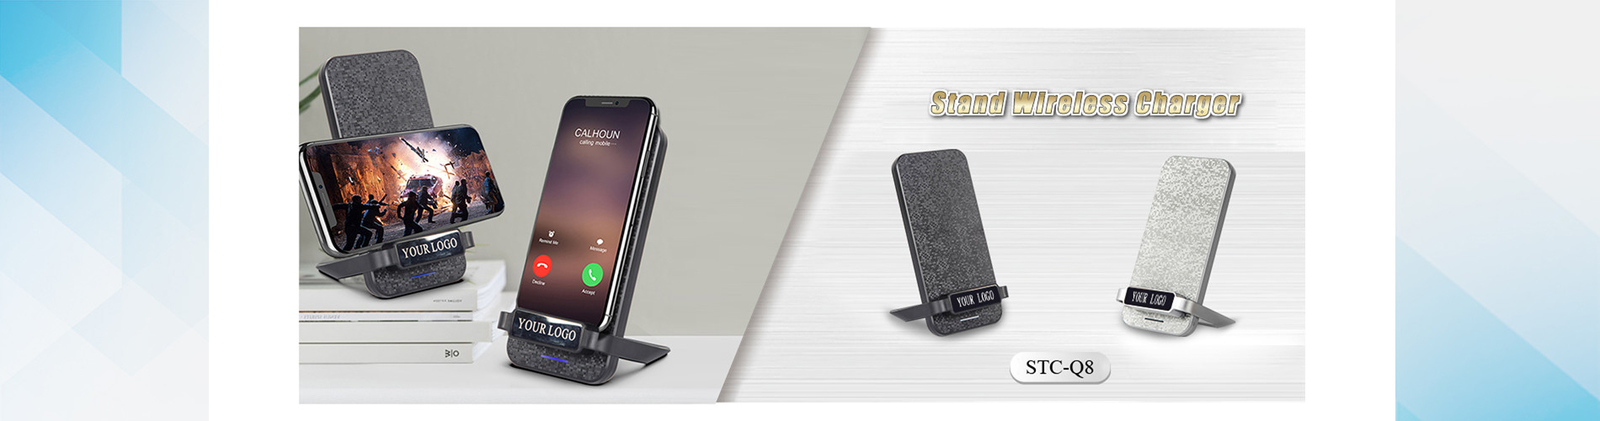 China best Desktop Wireless Charger on sales